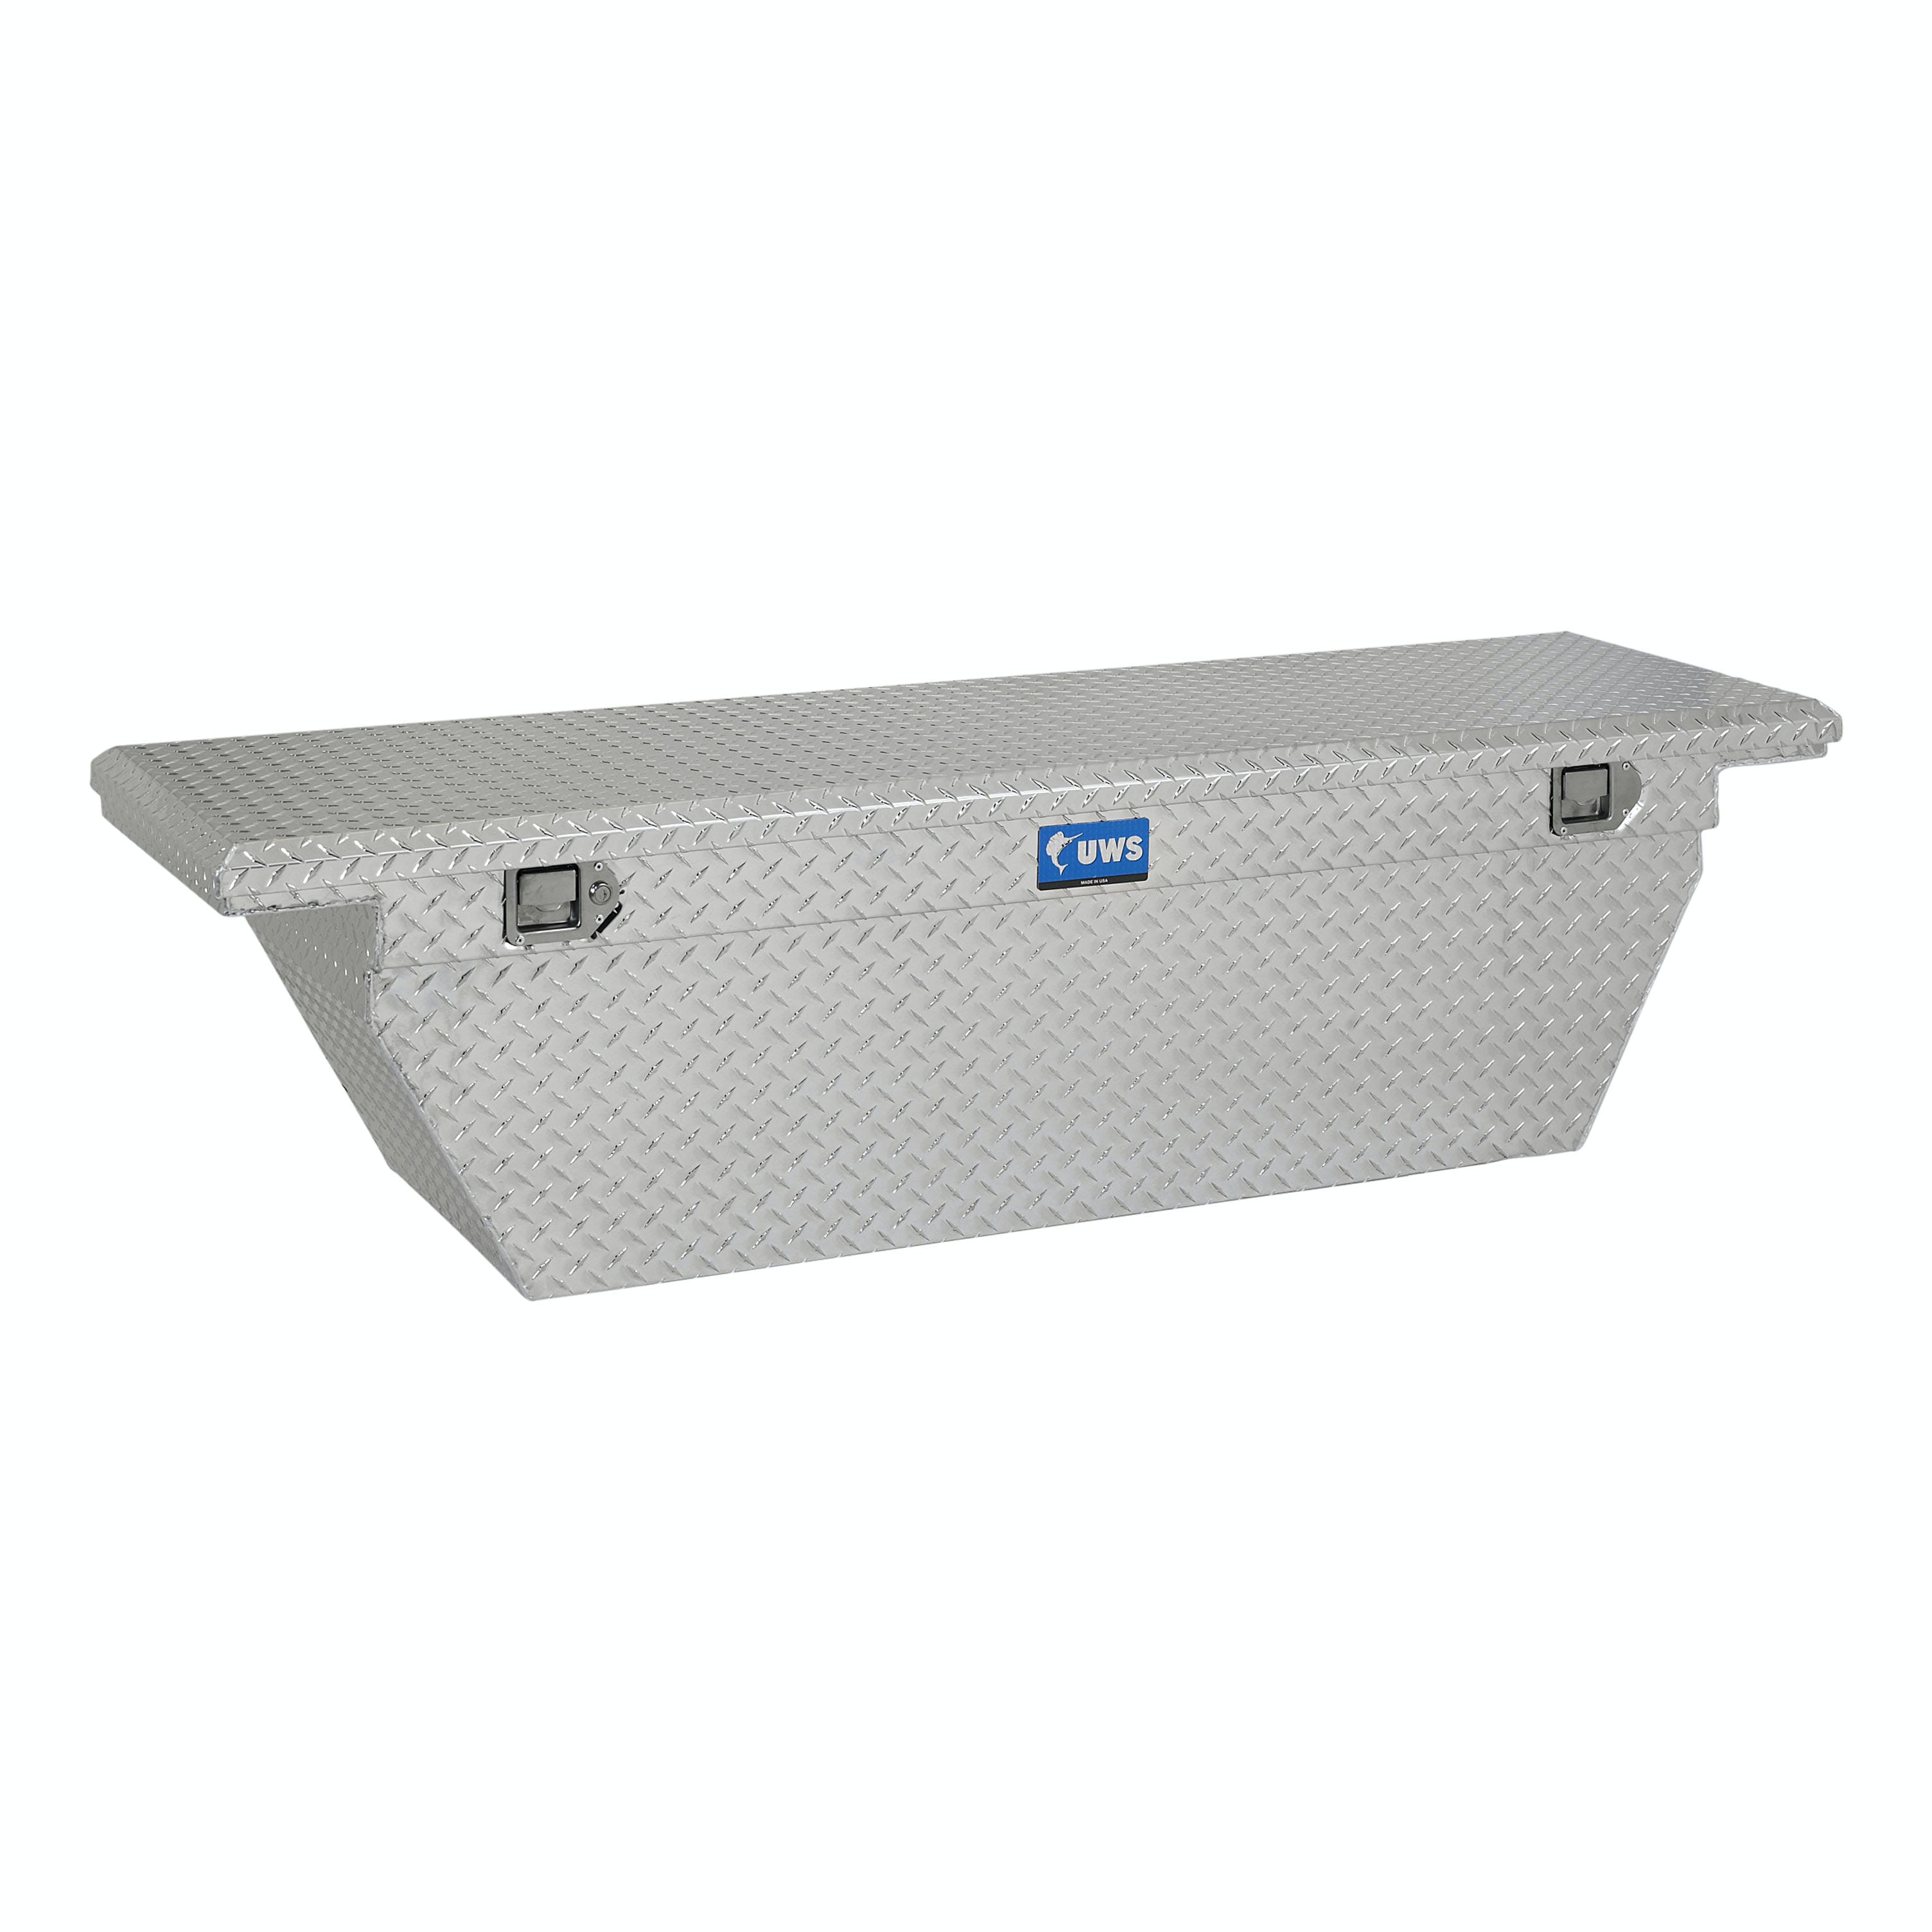 UWS TBSD-72-A-LP 72 inch Aluminum Single Lid Crossover Toolbox Deep Low Profile Angled